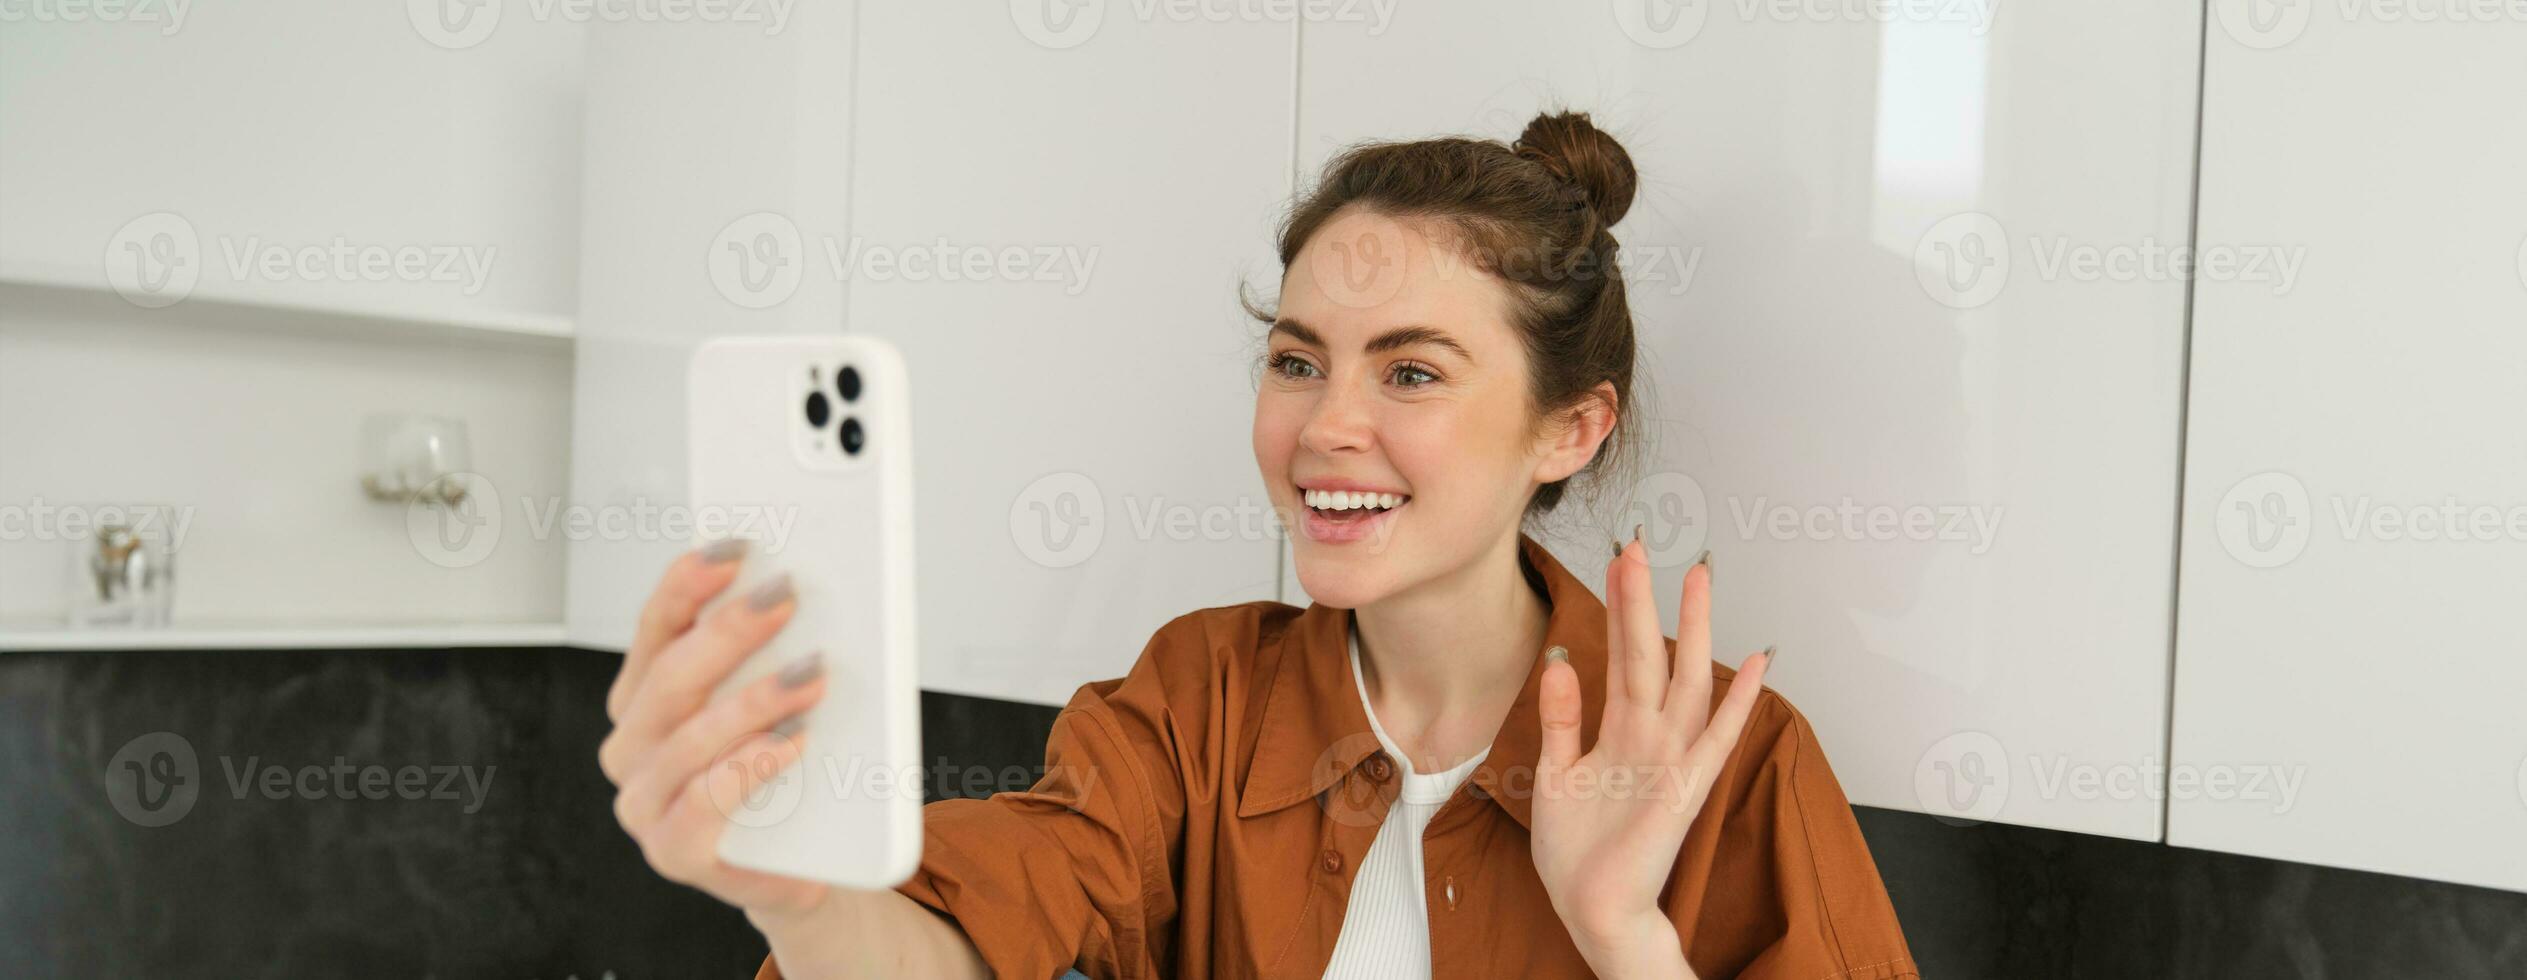 Portrait of young cheerful woman laughing and smiling during phone call, video chats with friend, sits on kitchen counter and talks to someone using smartphone app photo